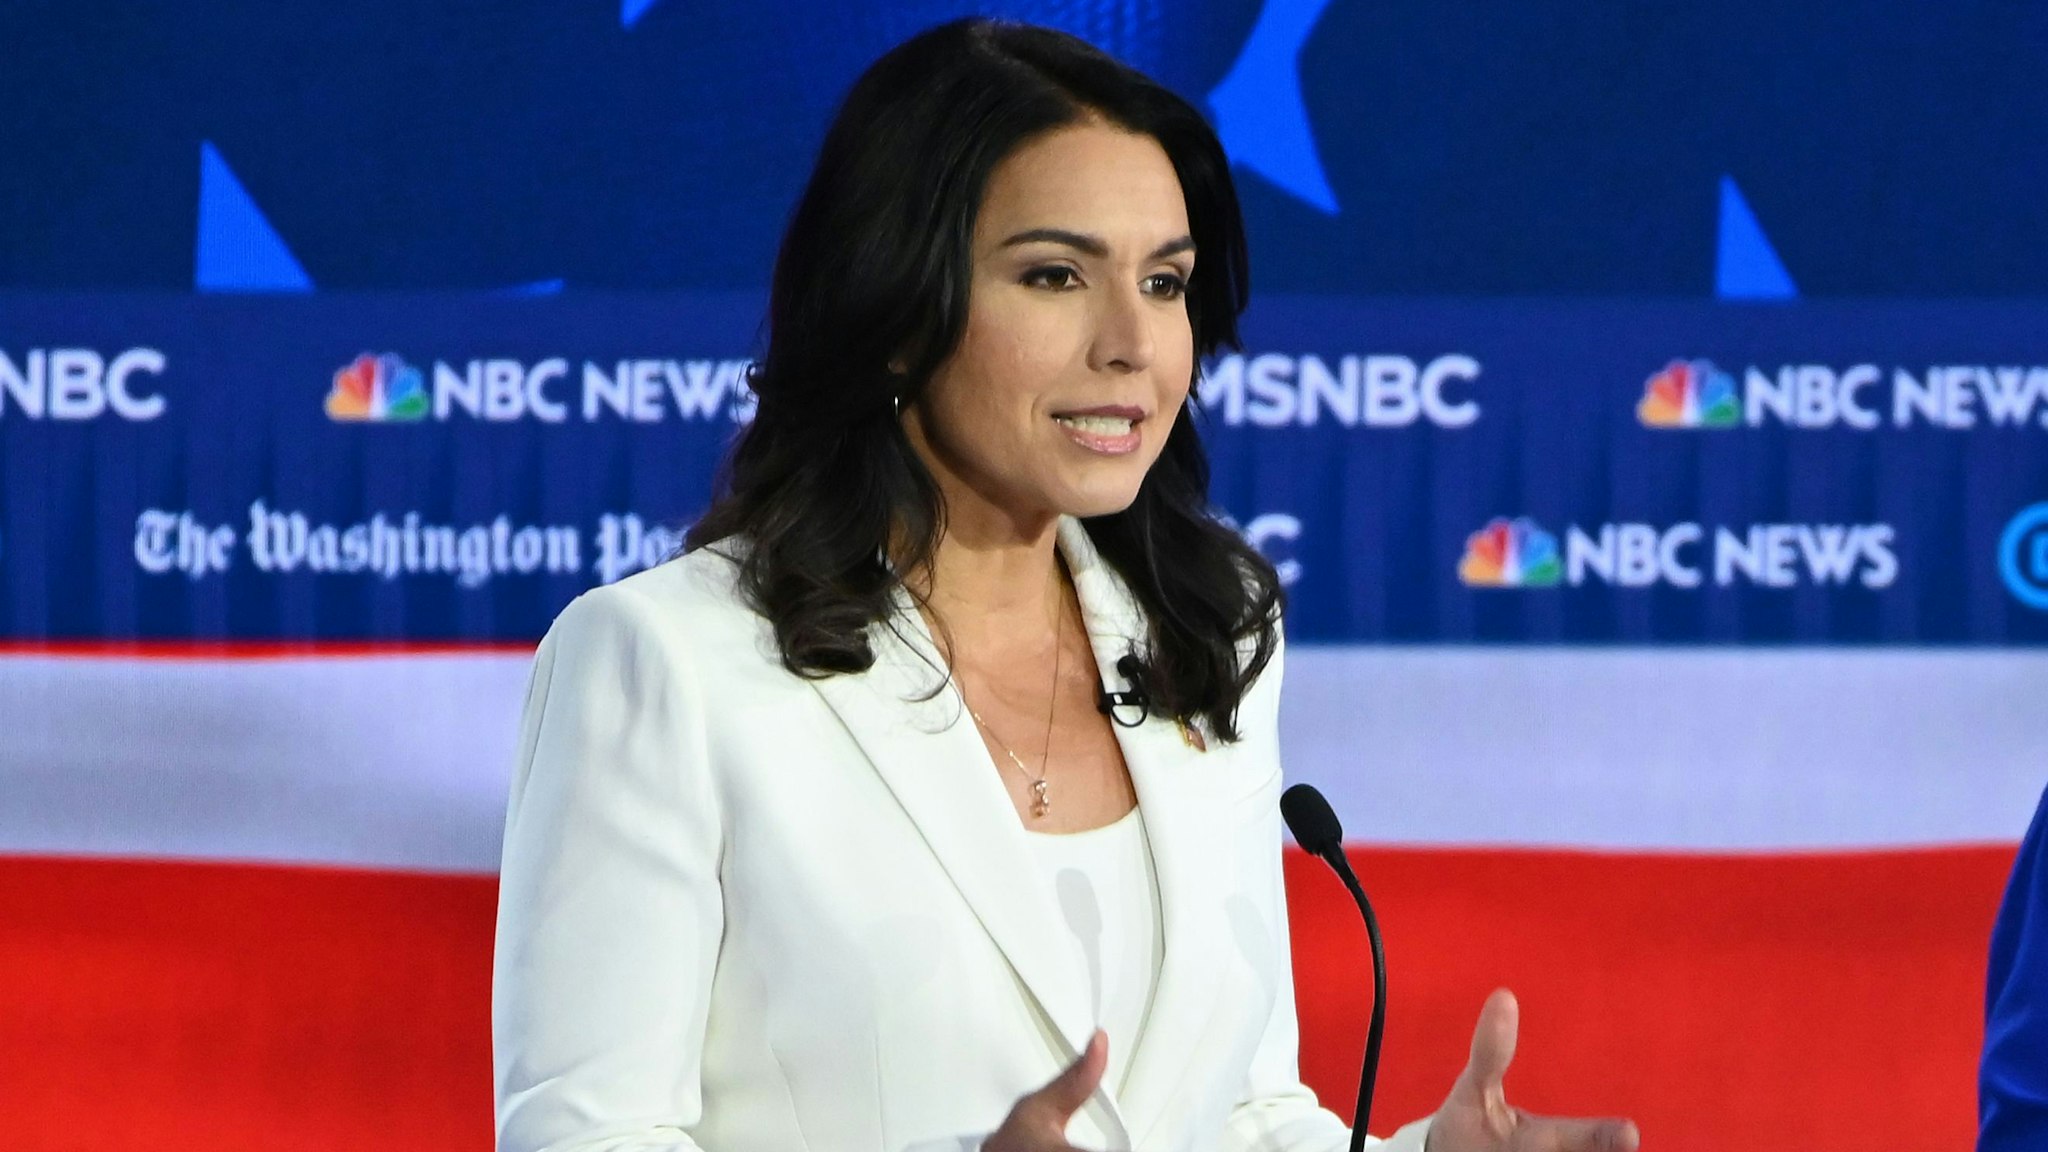 Democratic presidential hopefuls Representative for Hawaii Tulsi Gabbard (L) speaks as Minnesota Senator Amy Klobuchar listens during the fifth Democratic primary debate of the 2020 presidential campaign season co-hosted by MSNBC and The Washington Post at Tyler Perry Studios in Atlanta, Georgia on November 20, 2019.